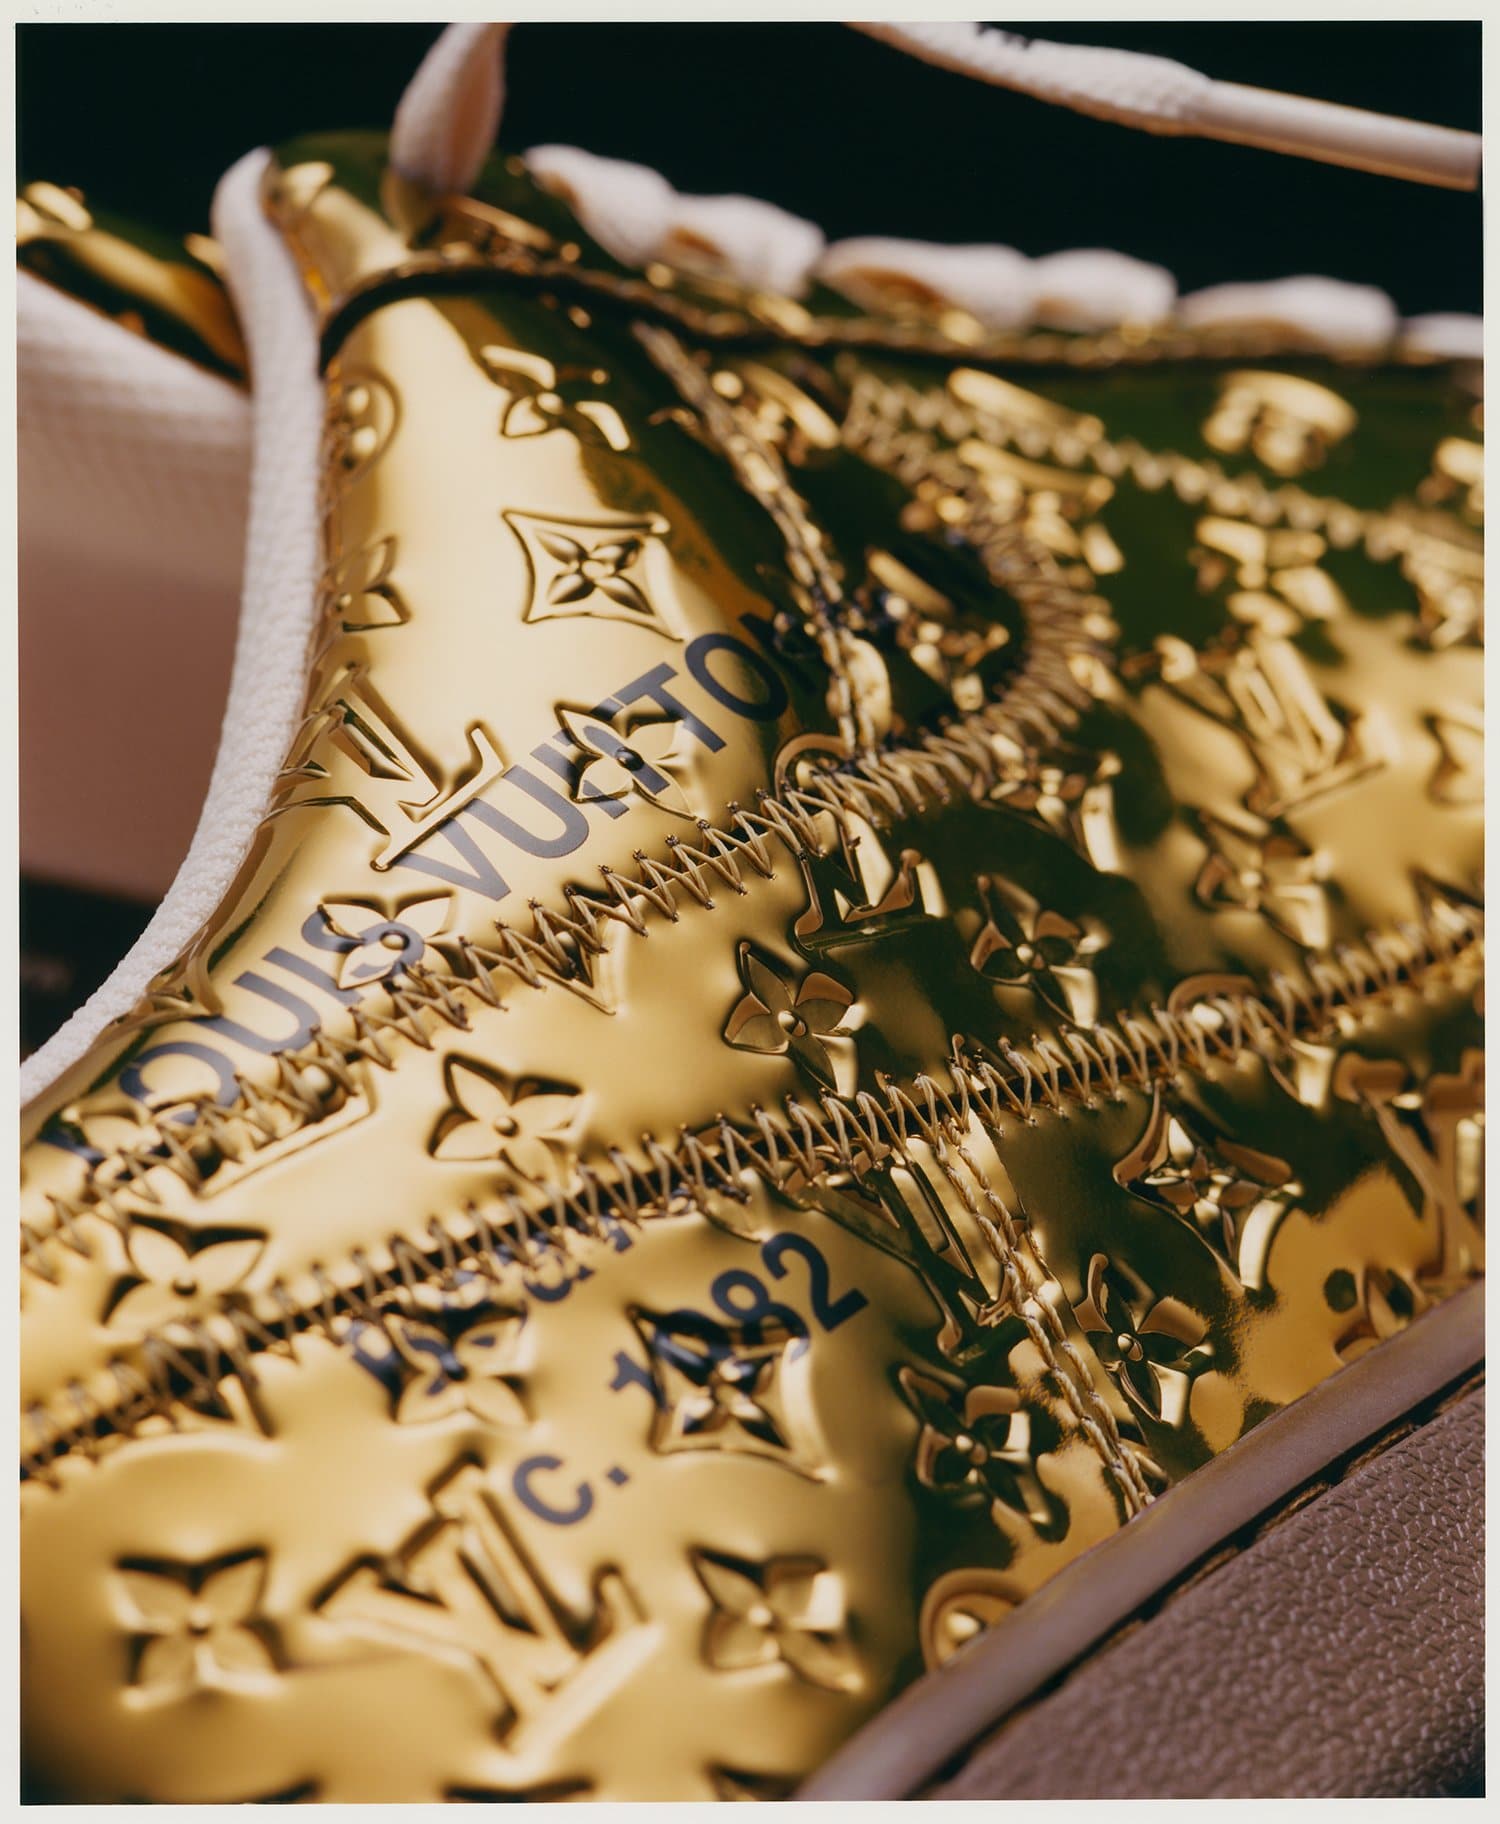 A New Collection by Louis Vuitton and Nike Was Unveiled